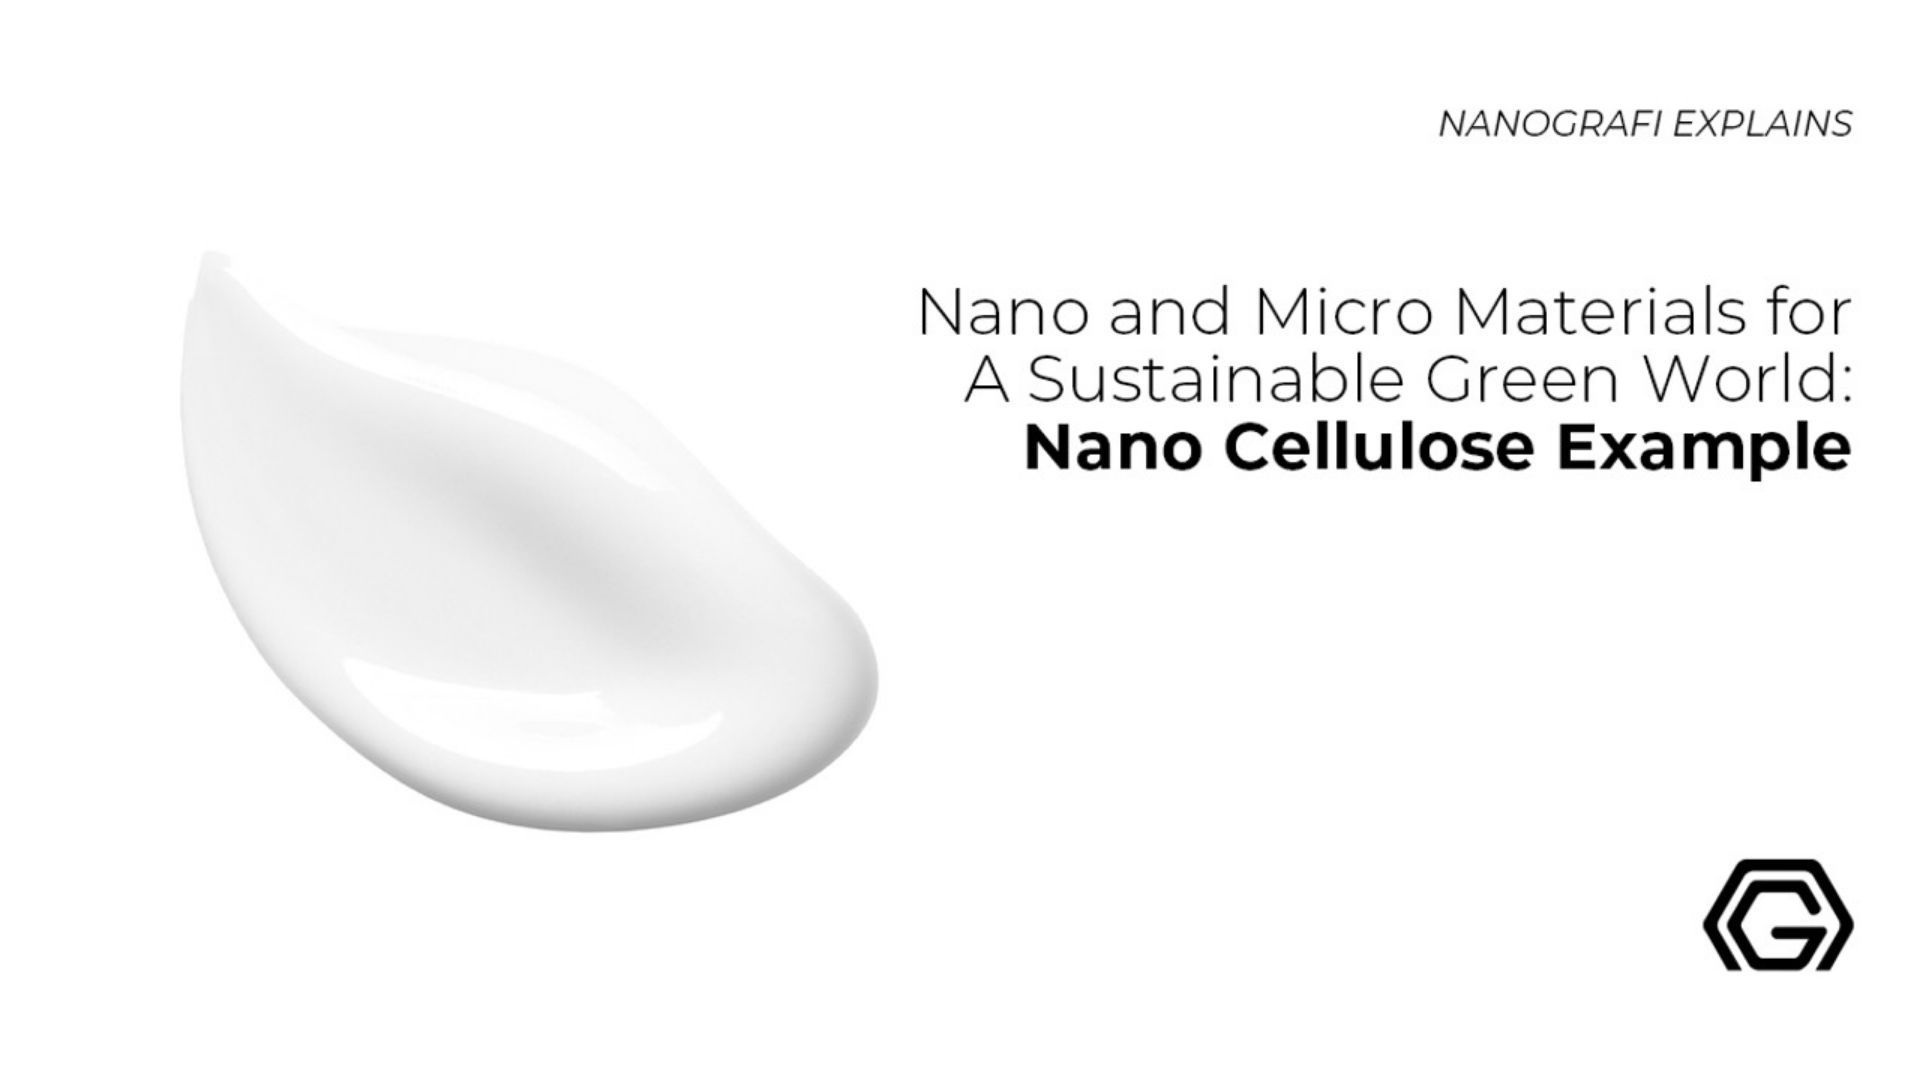 Nano and micro materials for a sustainable green world: nano cellulose example